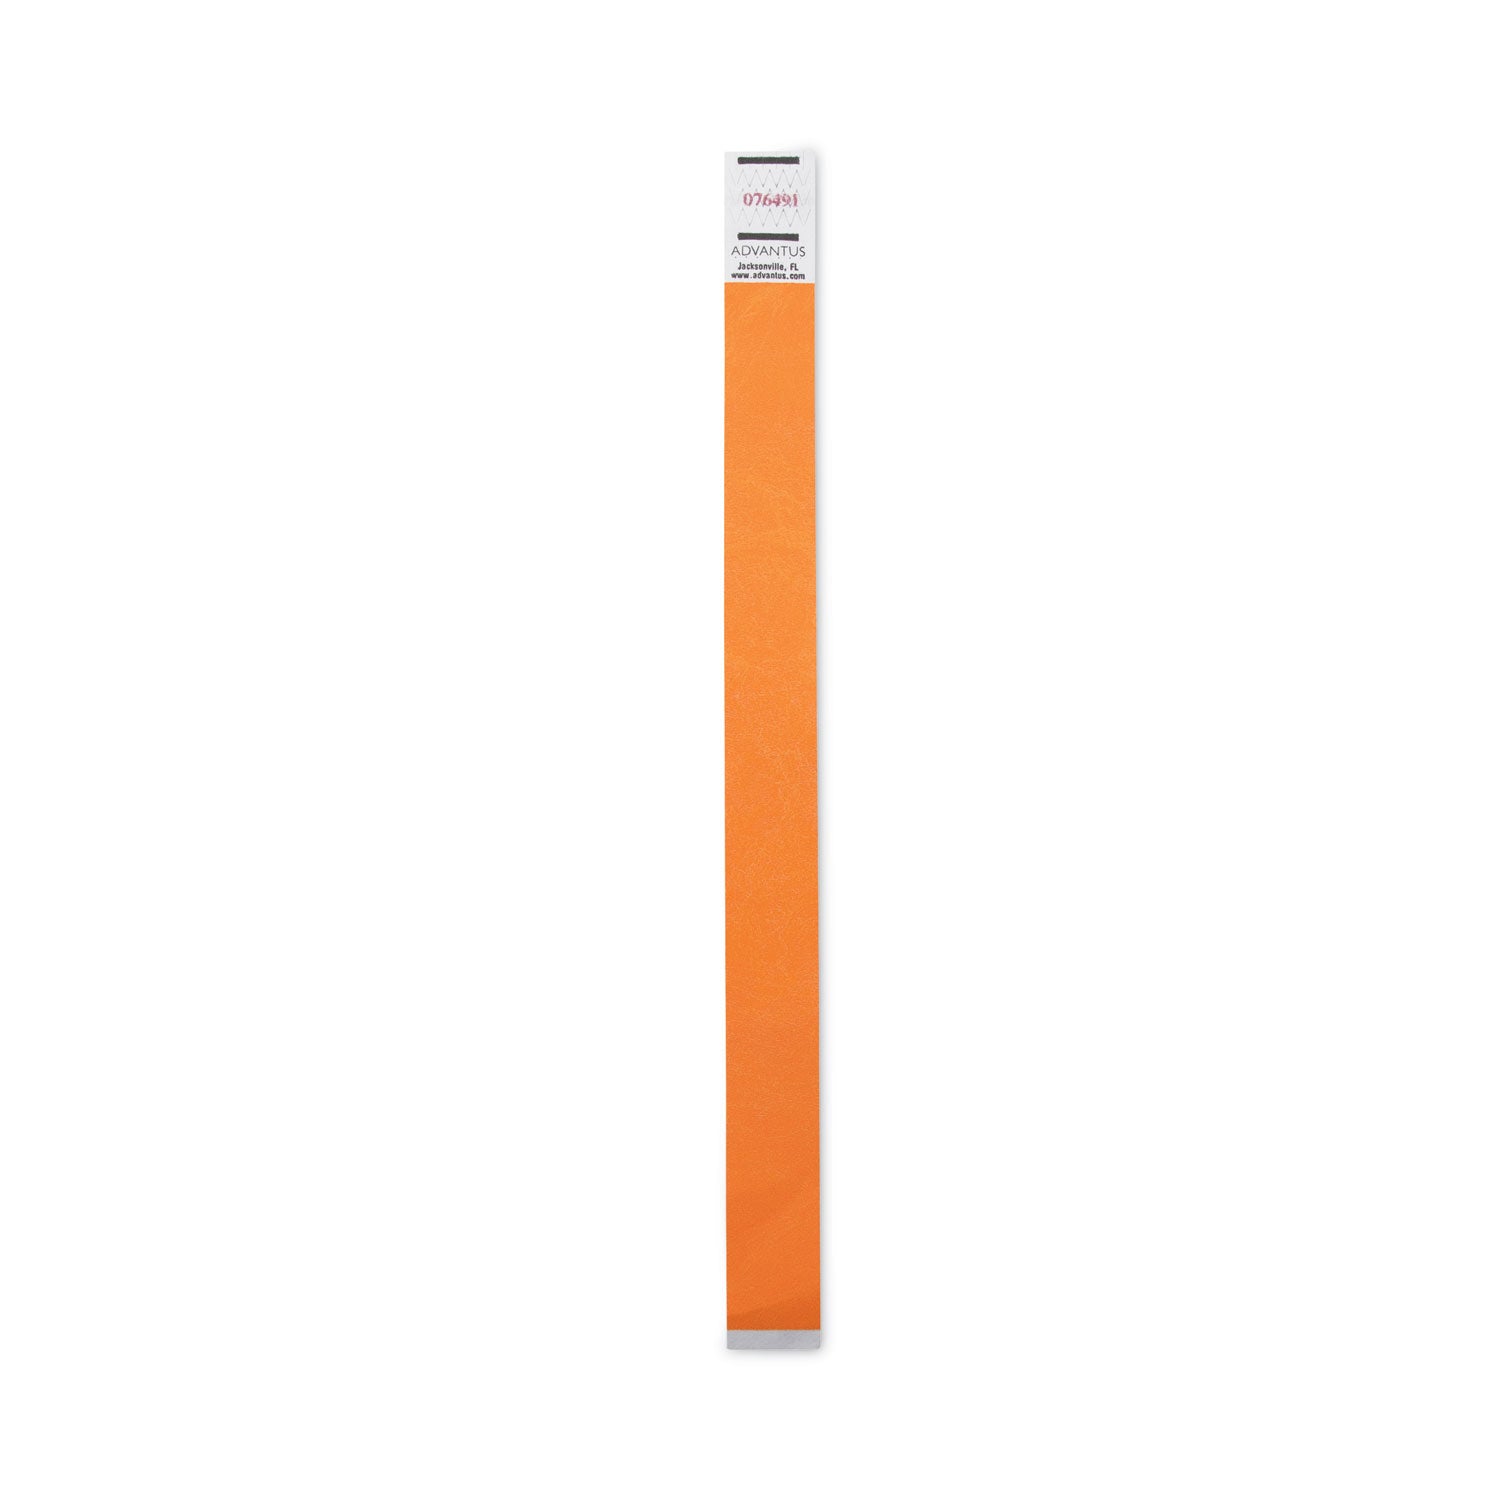 crowd-management-wristbands-sequentially-numbered-975-x-075-neon-orange-500-pack_avt91120 - 4